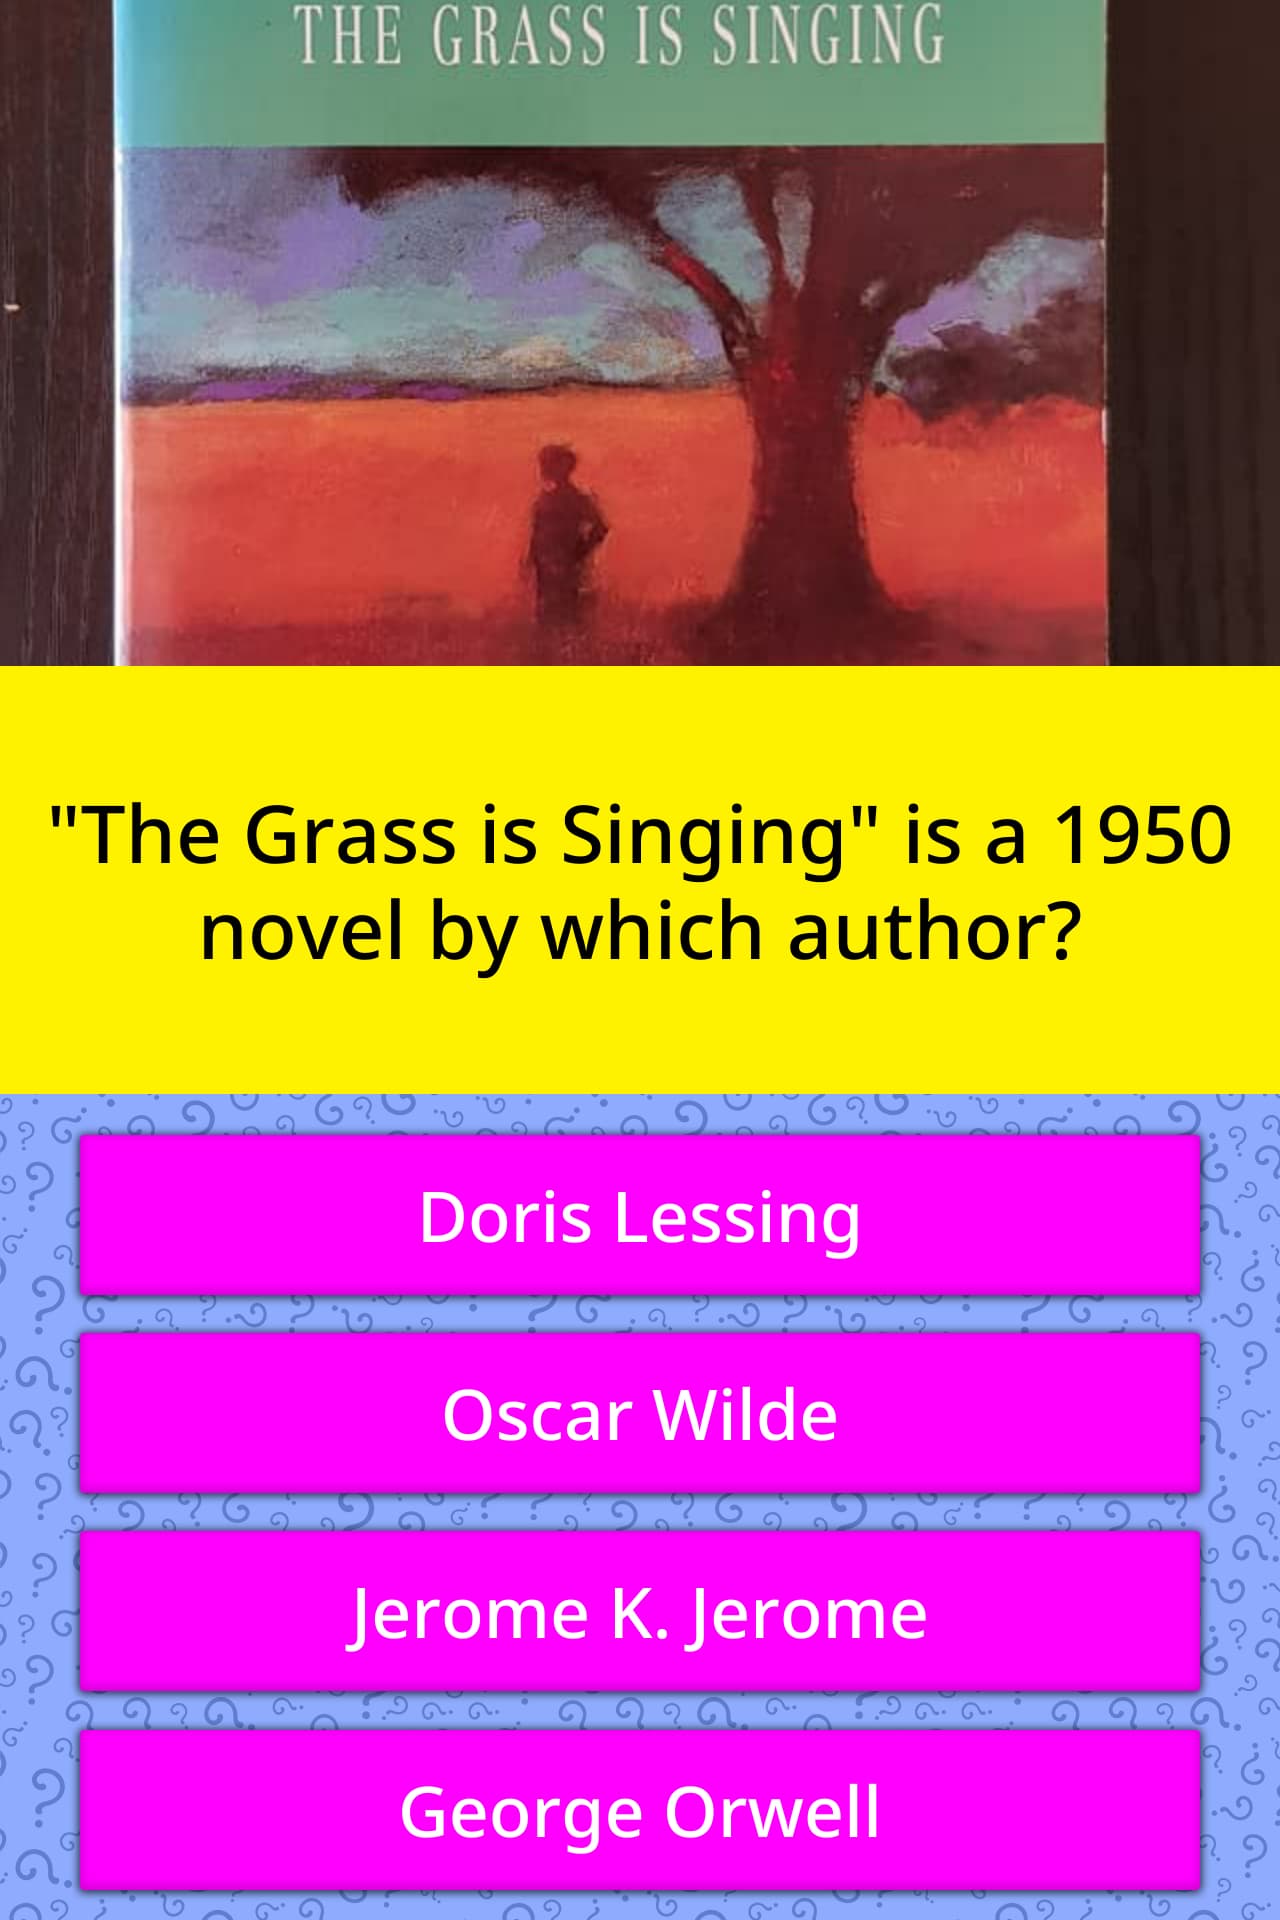 prompt questions for the grass is singing